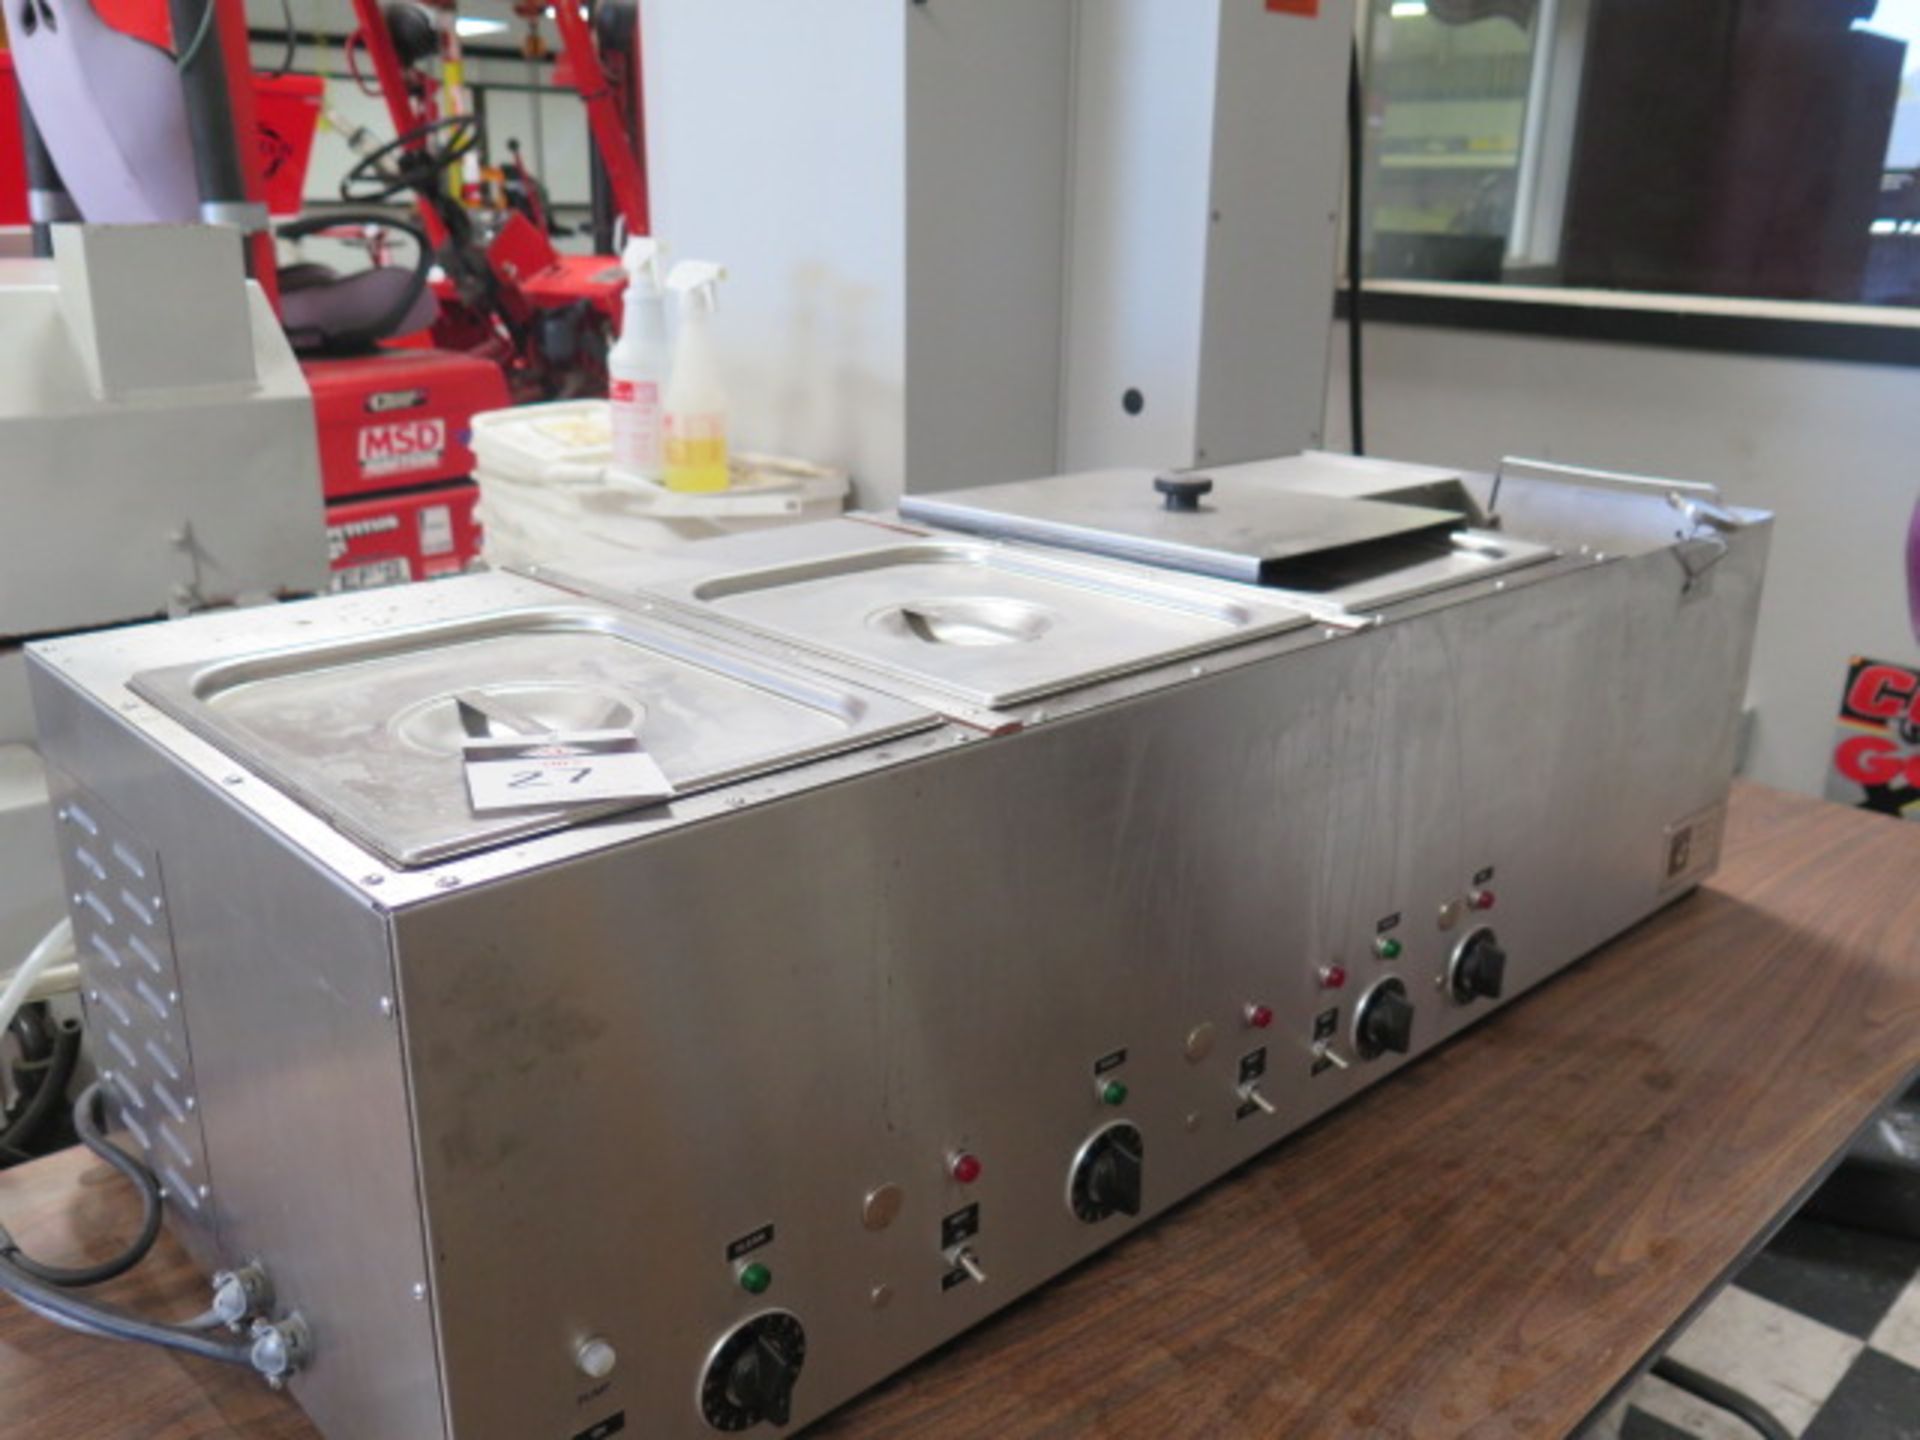 Esma "Betman Cleaner" Ultrasonic Cleaning System (SOLD AS-IS - NO WARRANTY) - Image 7 of 16